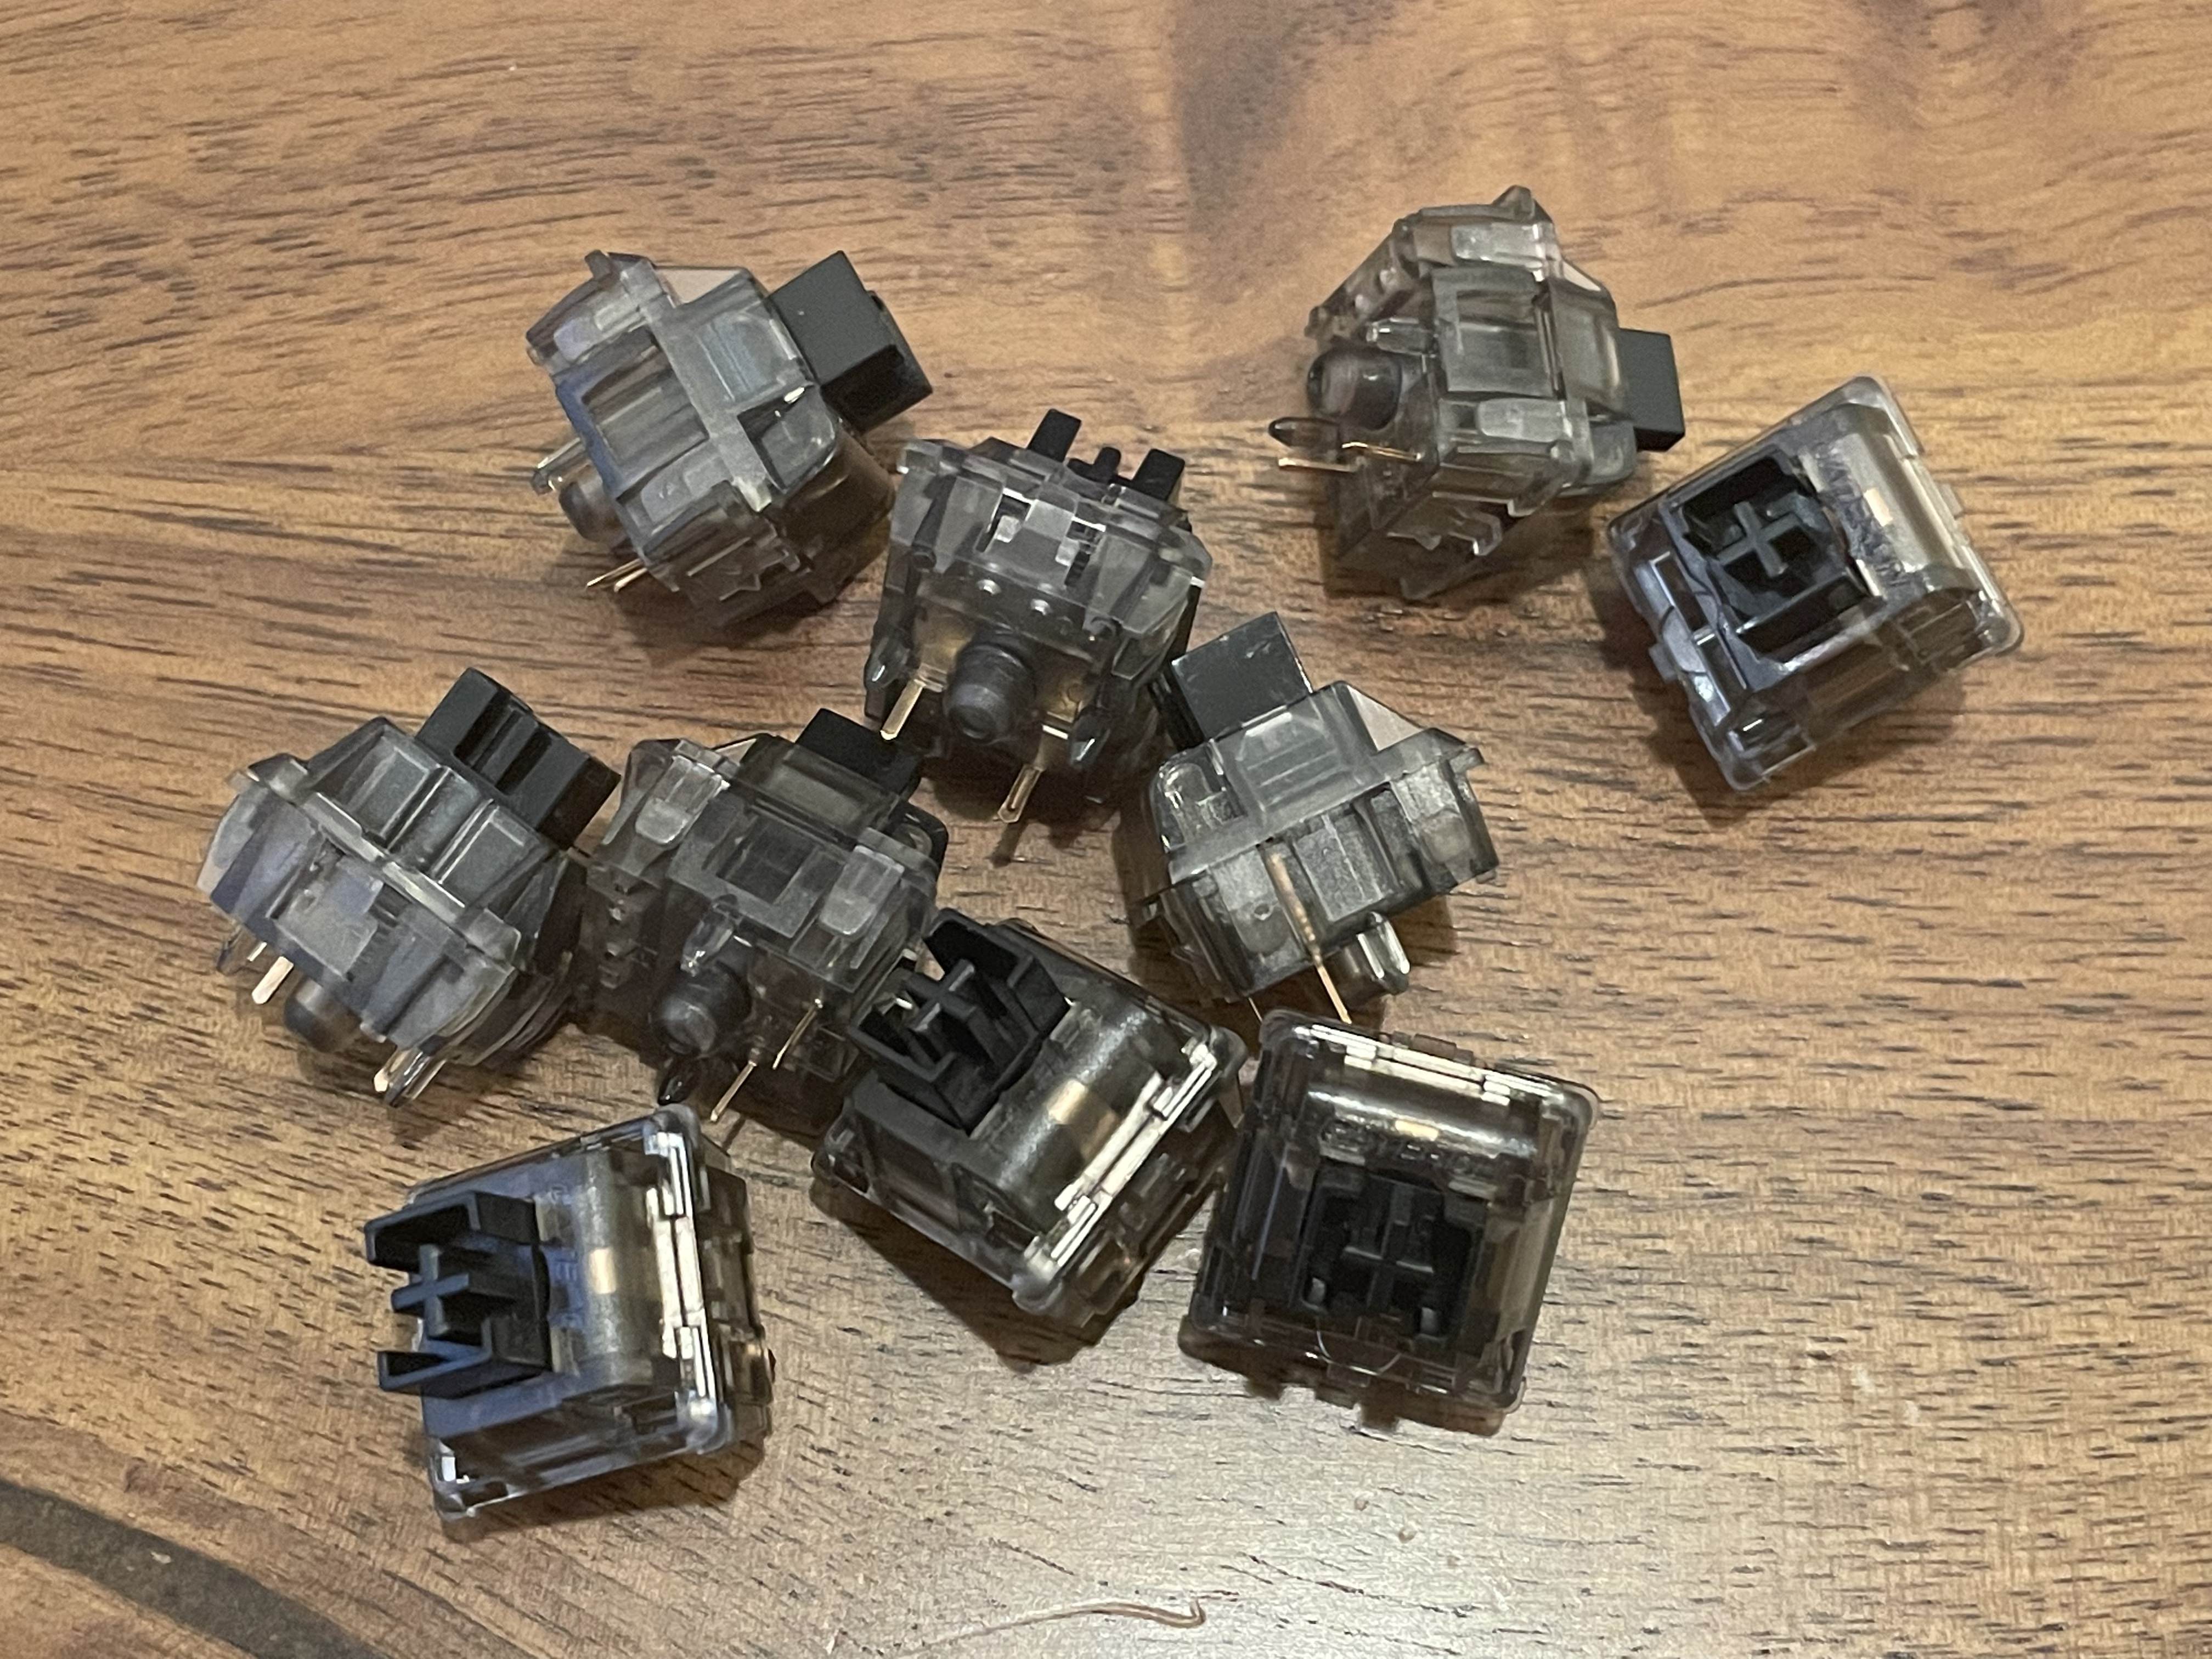 Gateron BOX Black Inks V2 Switches - KeebsForAll